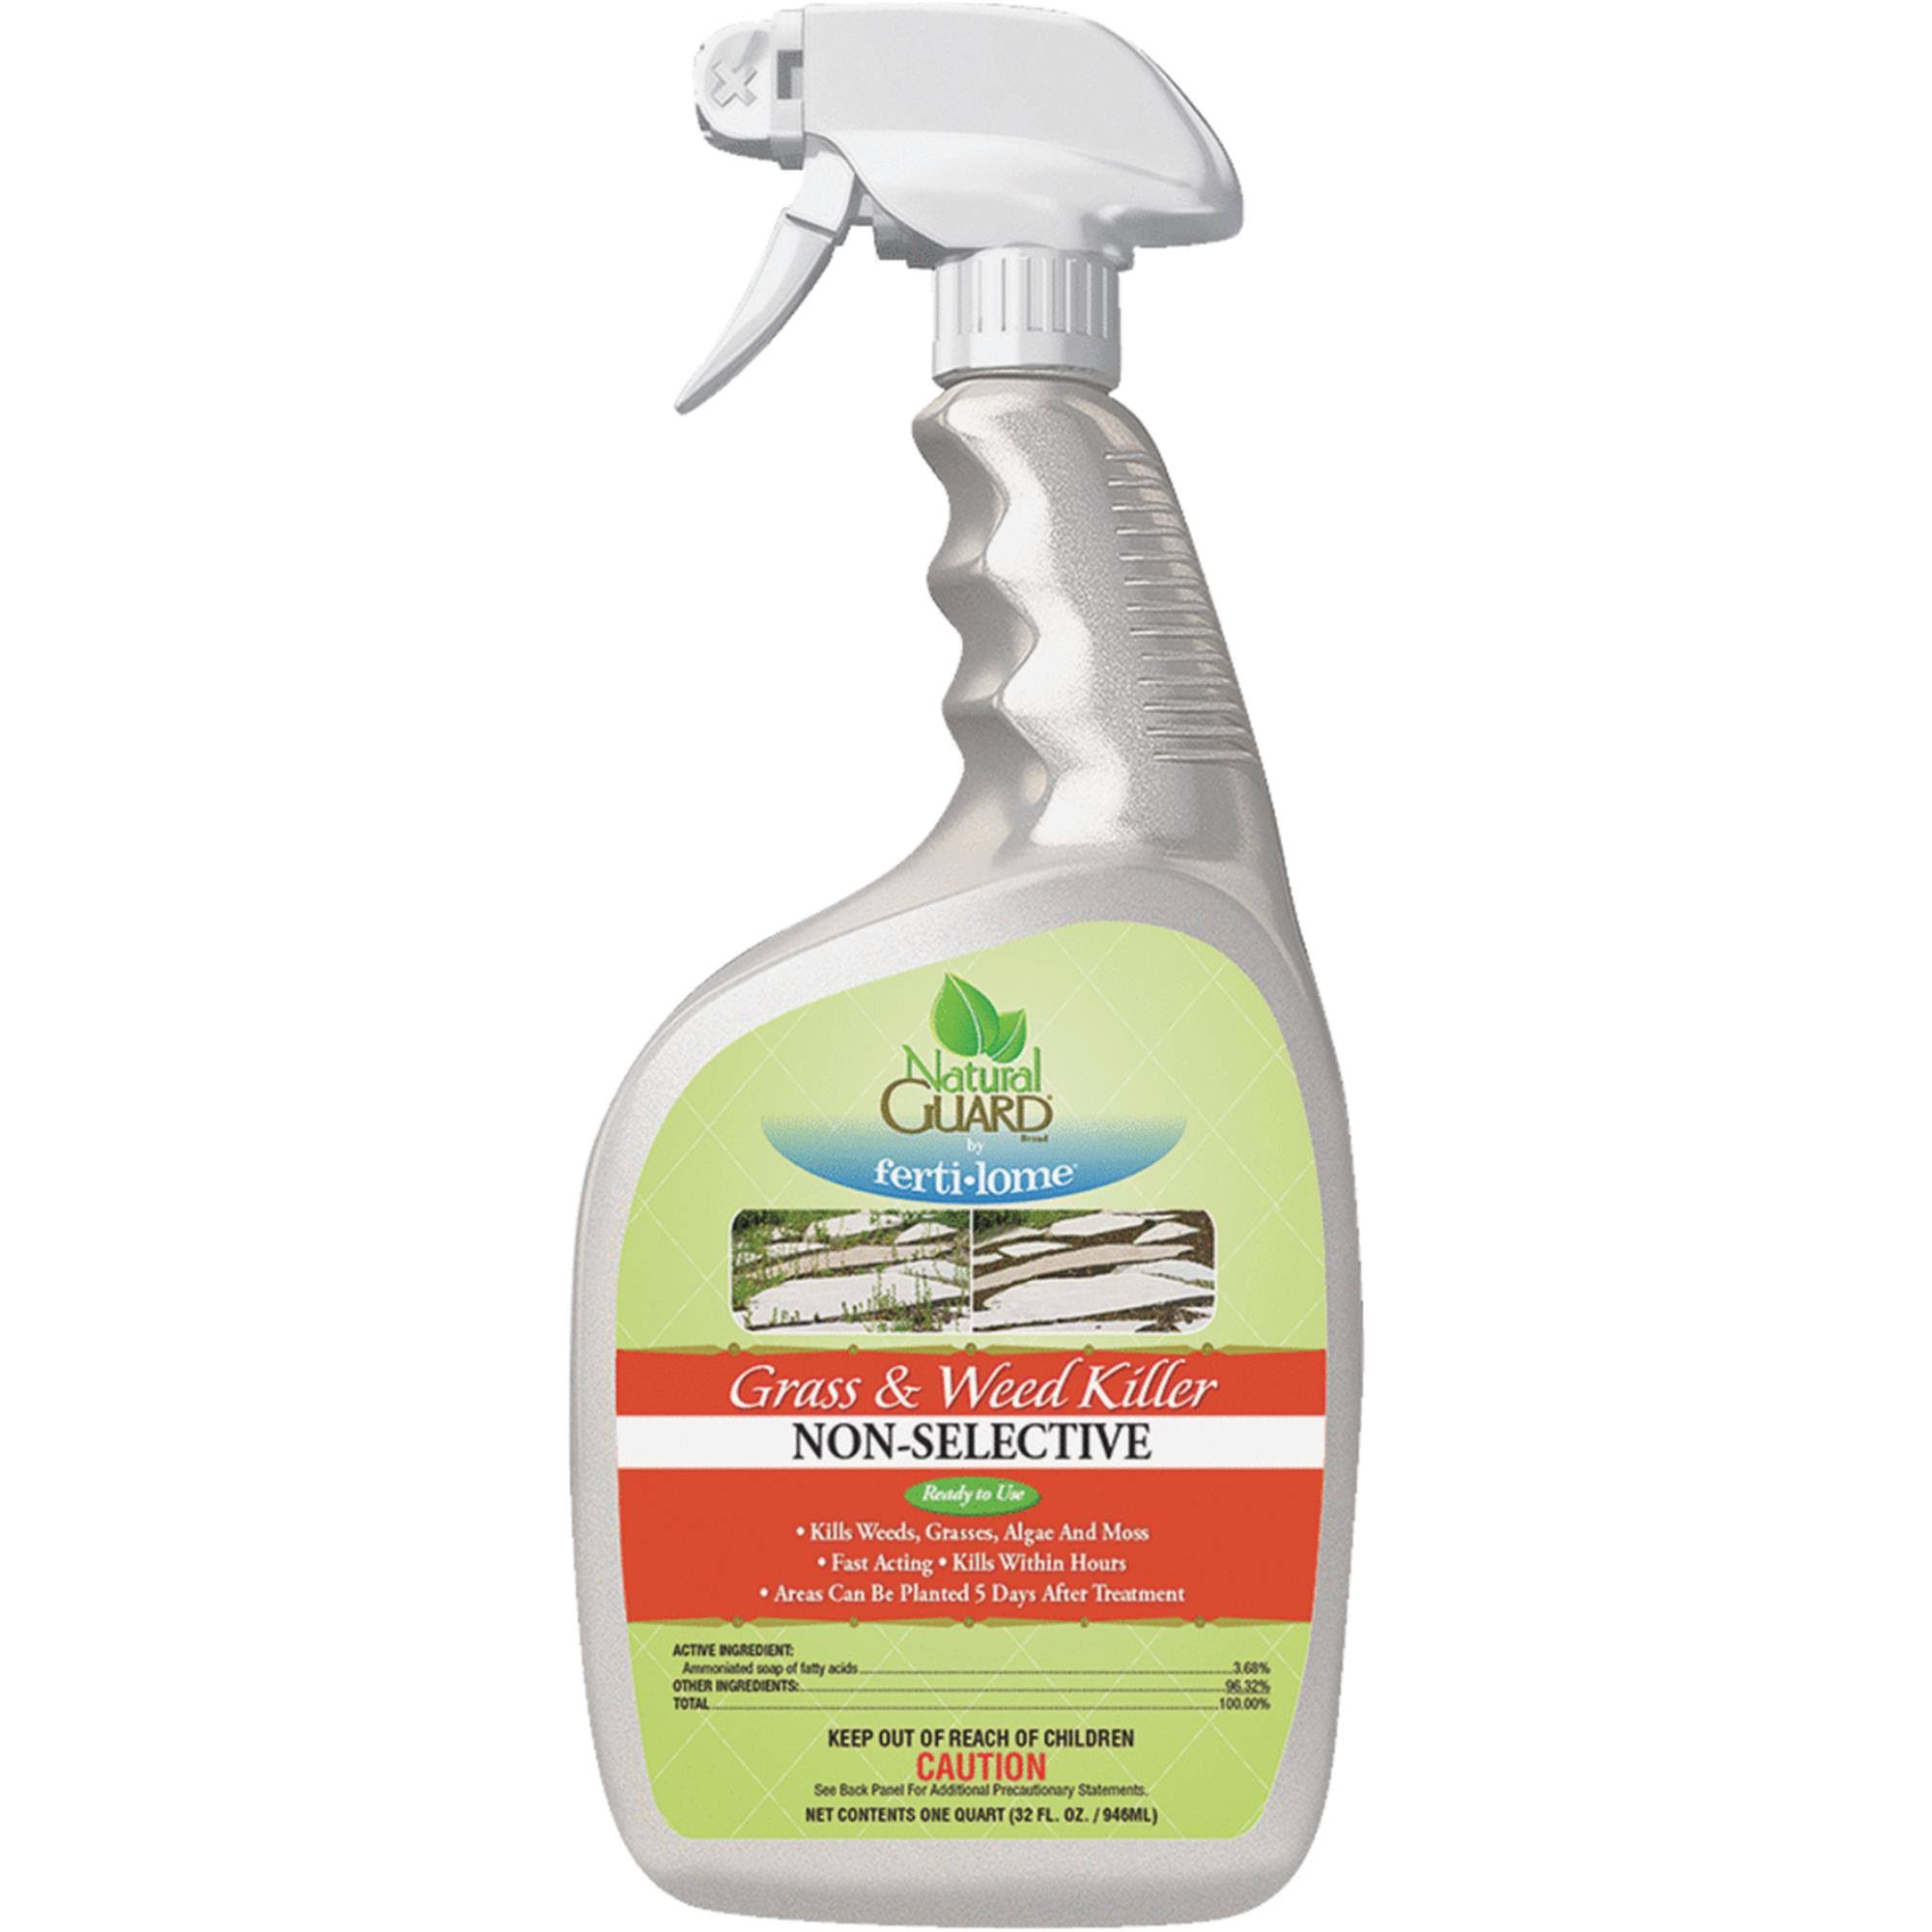 Natural Guard 1 qt. Ready To Use Trigger Spray Weed & Grass Killer 40478